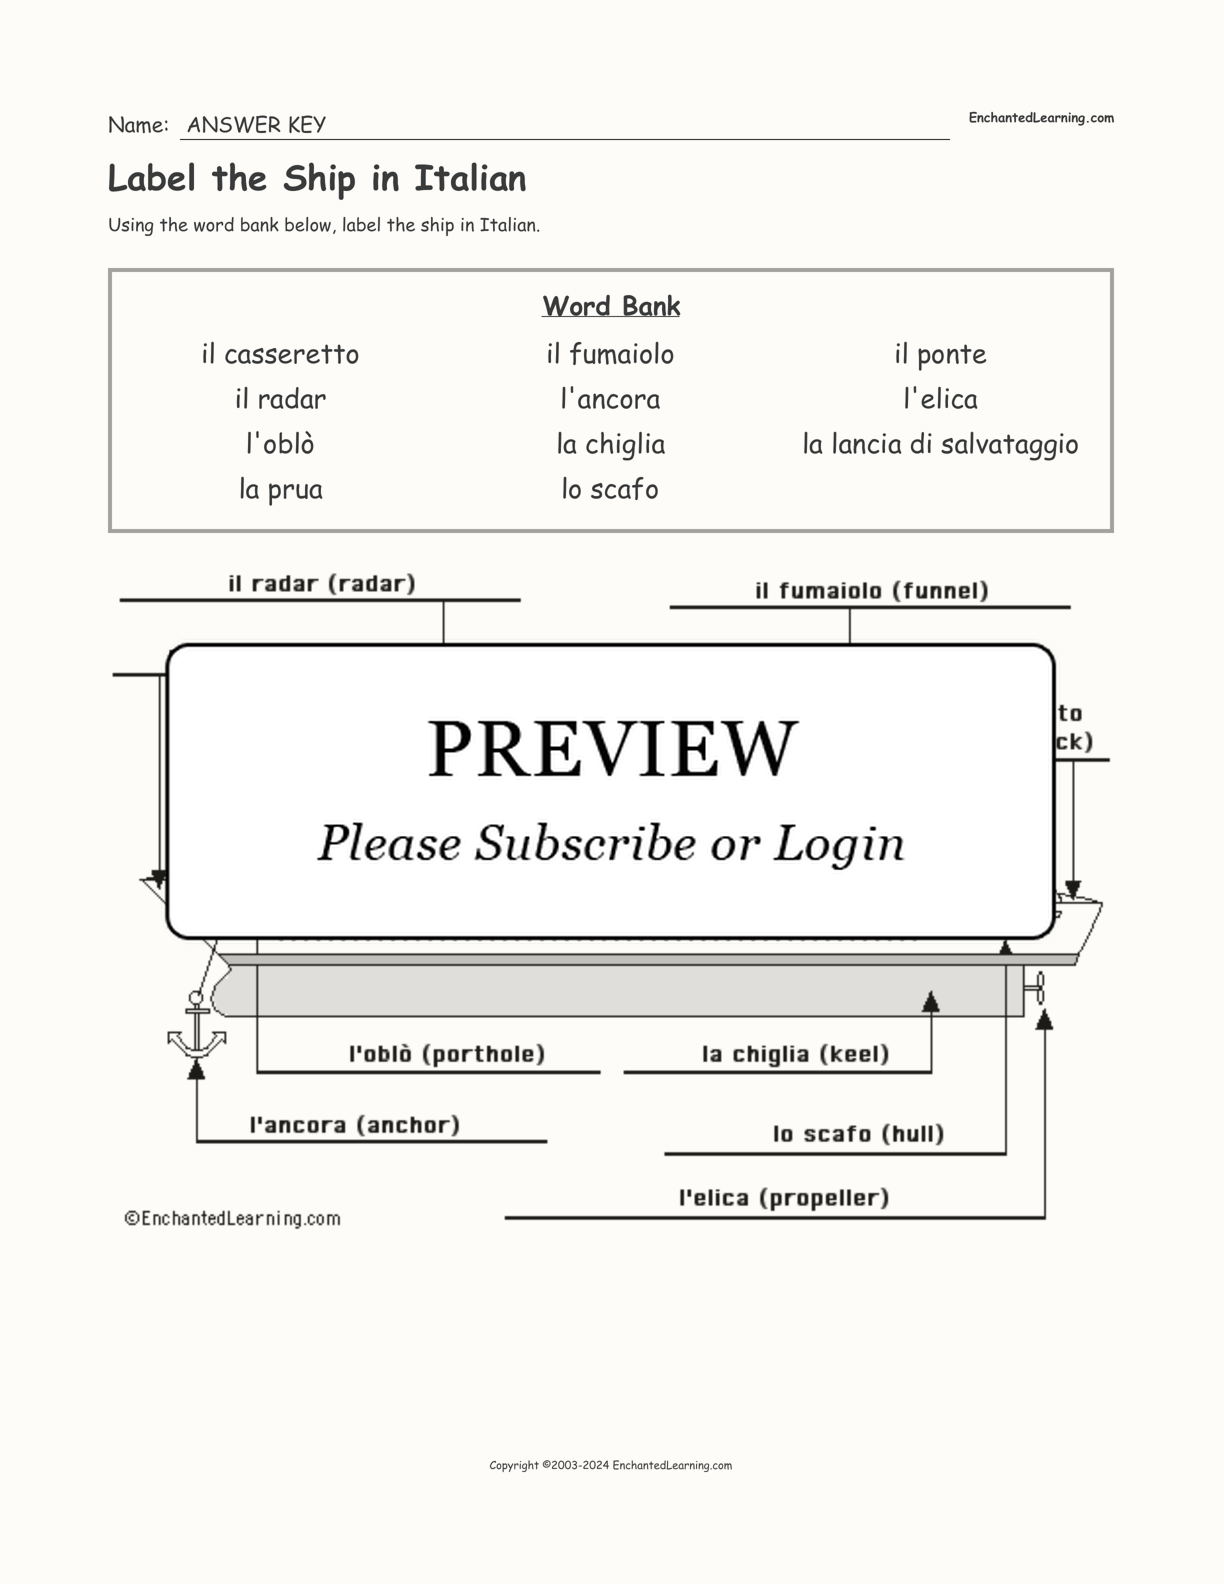 Label the Ship in Italian interactive worksheet page 2